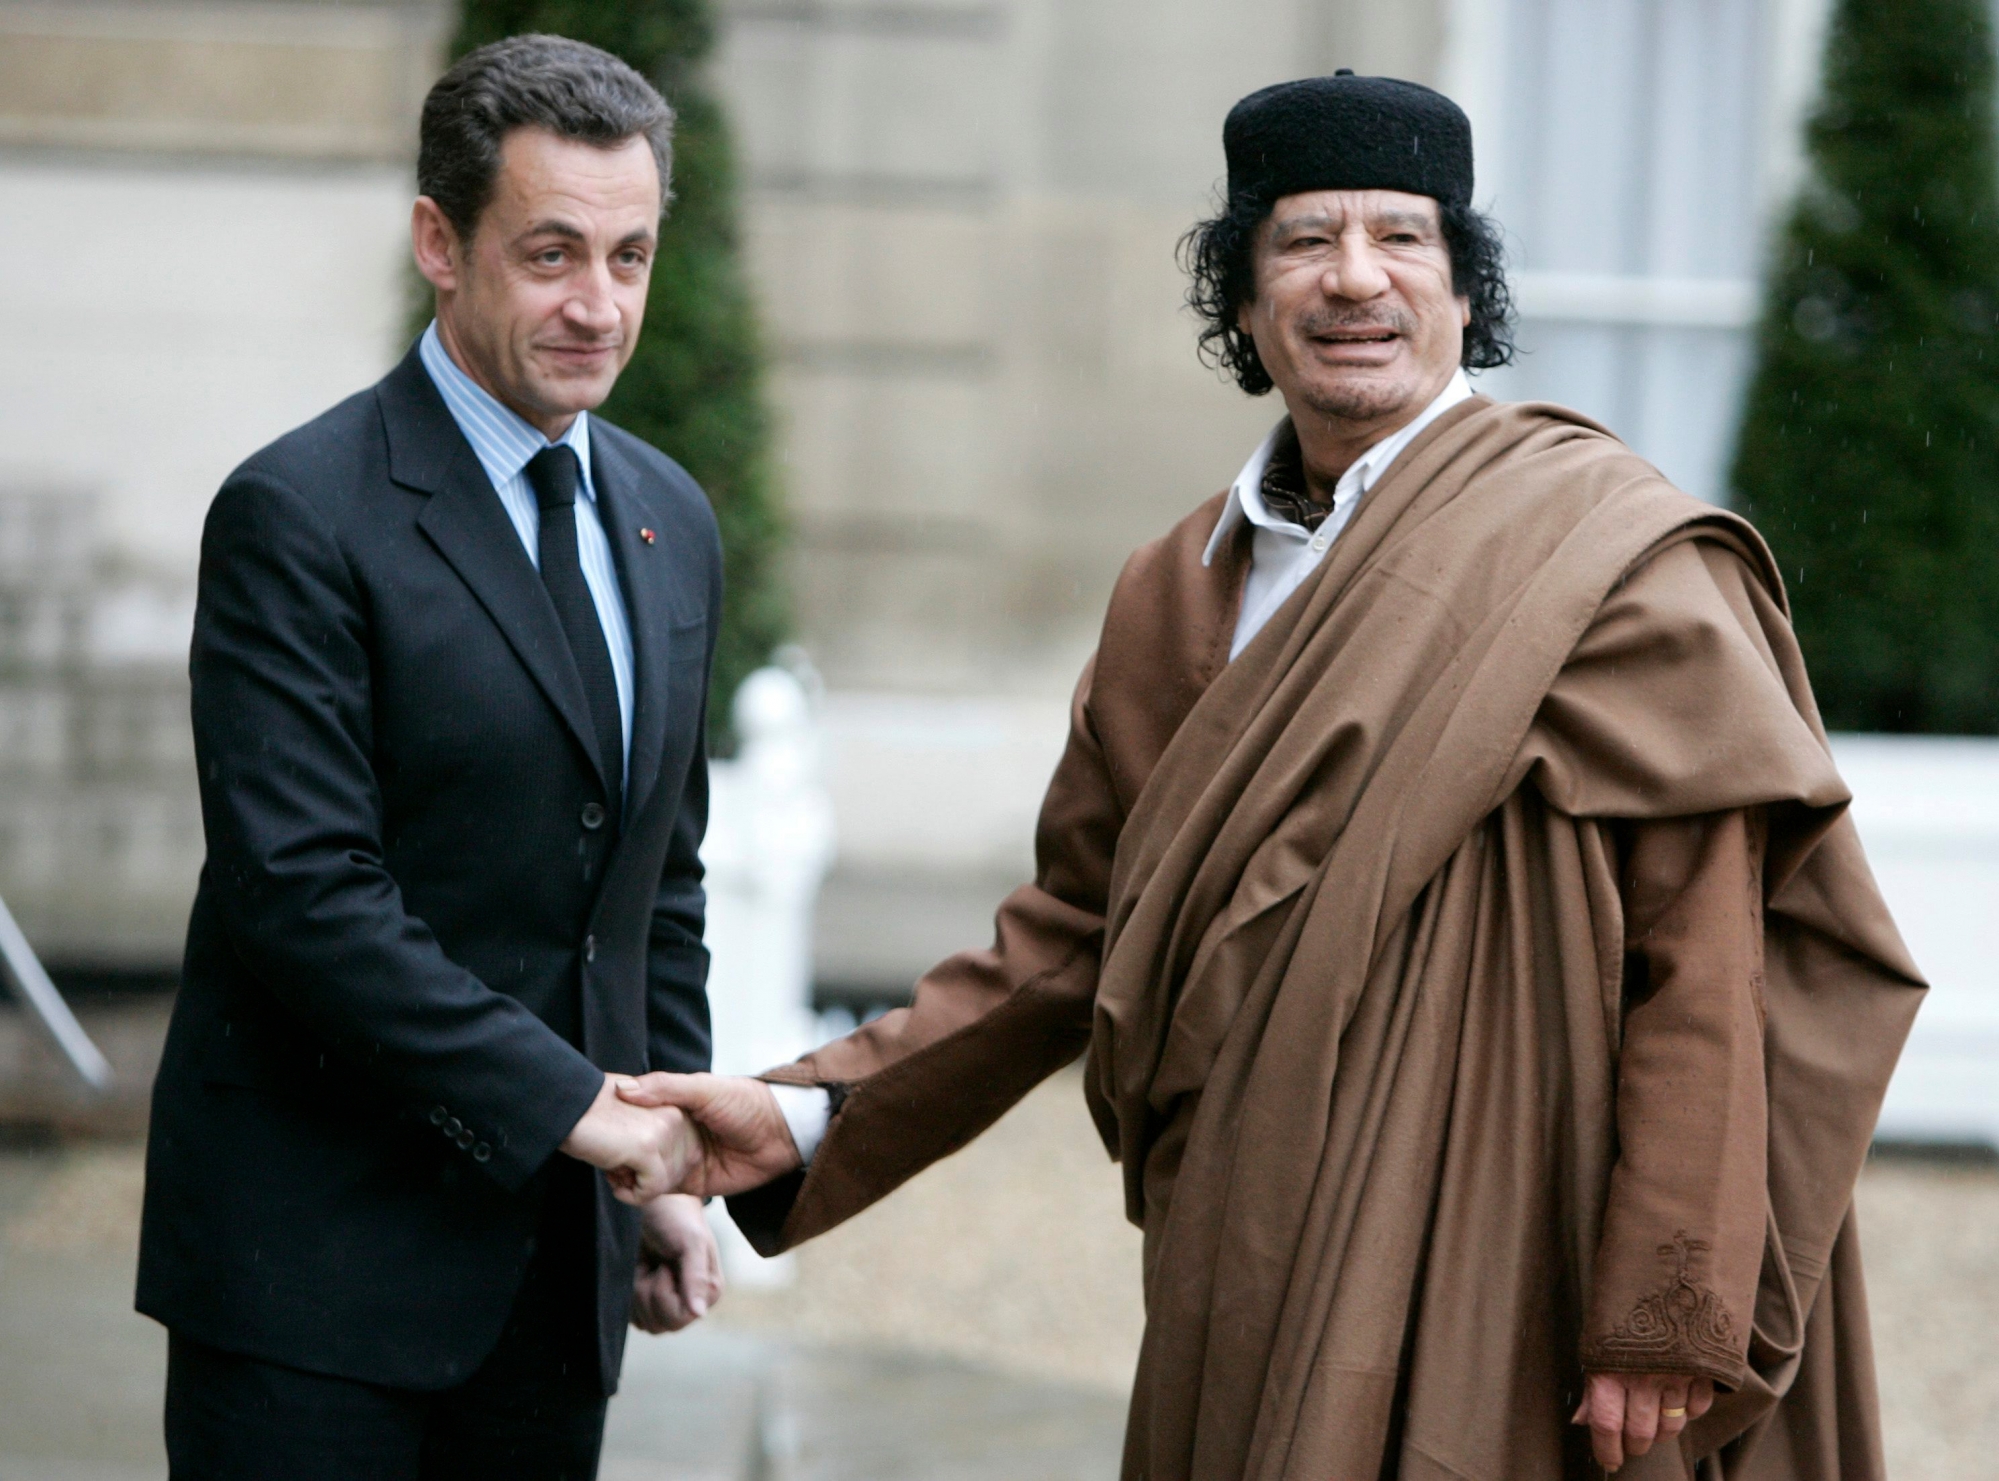 FILE - In this Dec. 10 2007 file photo, French President Nicolas Sarkozy, left, greets Libyan leader Col. Moammar Gadhafi upon his arrival at the Elysee Palace, in Paris. Former French President Nicolas Sarkozy was placed in custody on Tuesday March 20, 2018as part of an investigation that he received millions of euros in illegal financing from the regime of the late Libyan leader Moammar Gadhafi. (AP Photo/Francois Mori) France Sarkozy